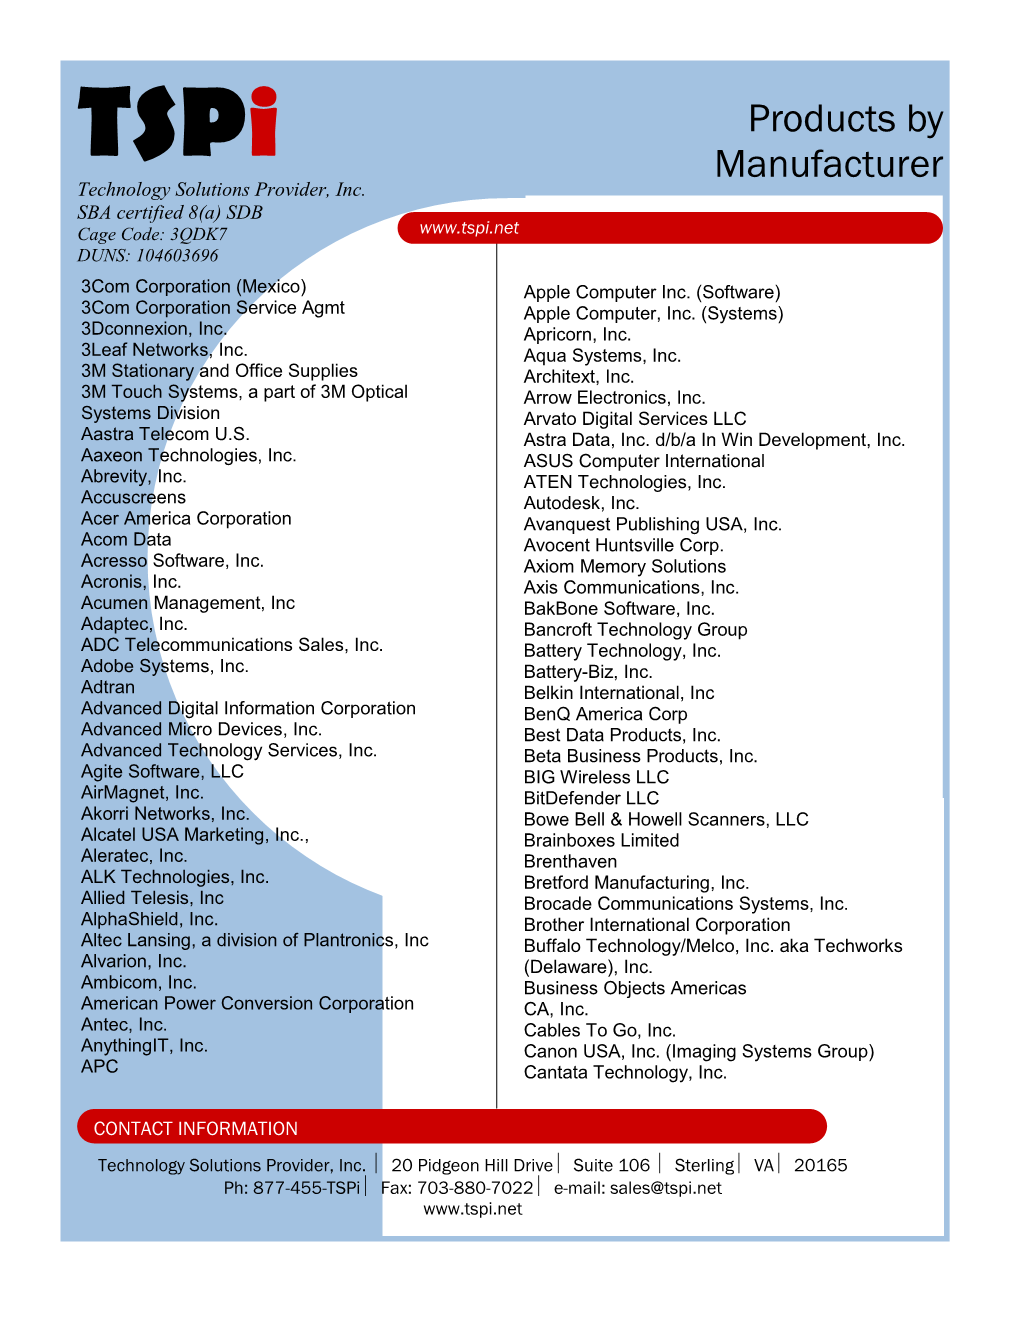 Products by Manufacturer